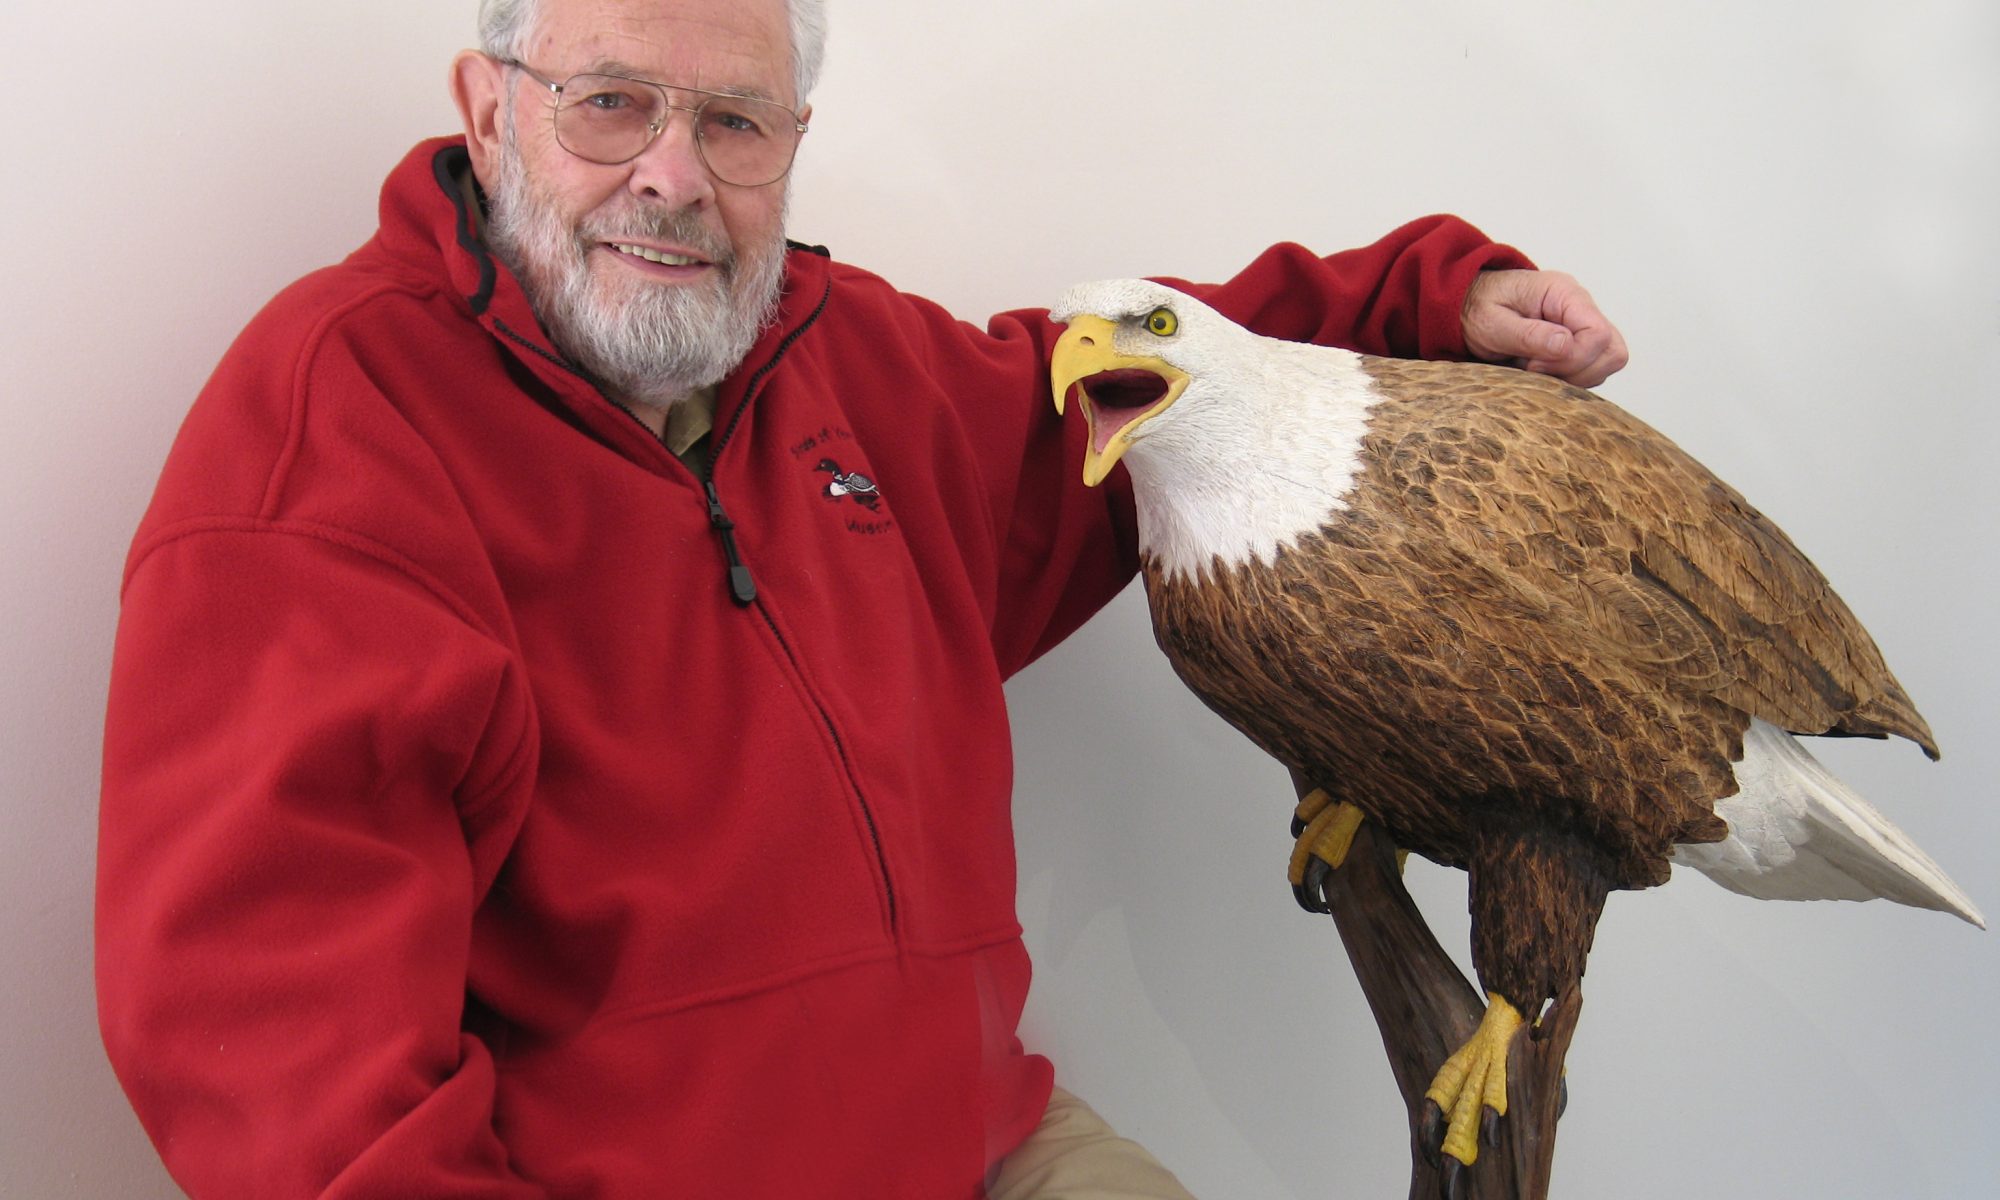 Bob Spear, Woodcarver, and his Bald Eagle carving